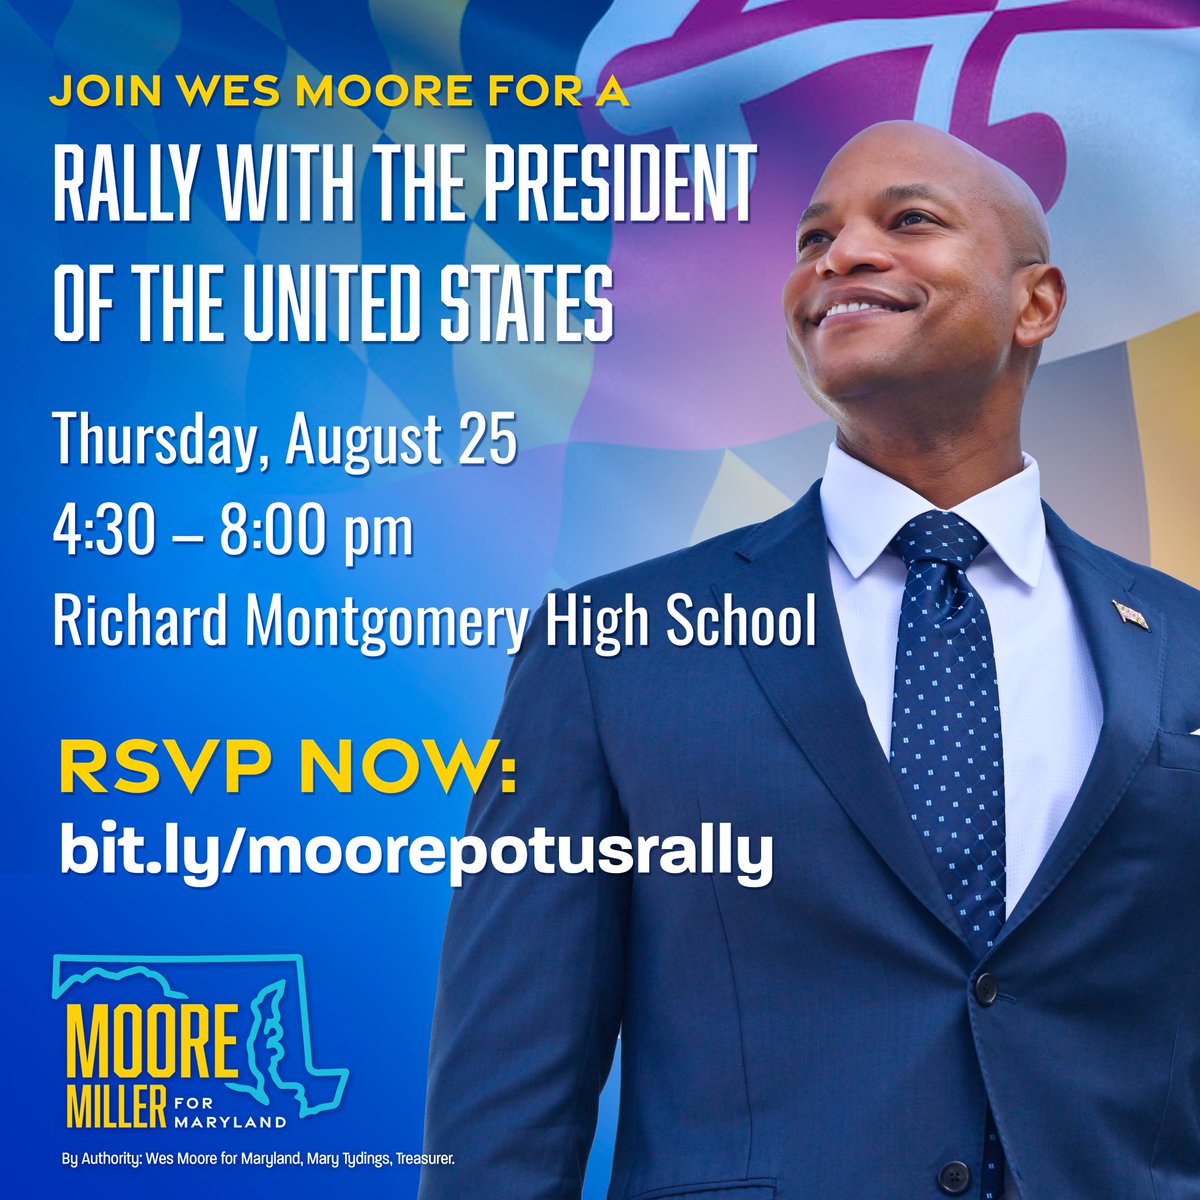 Thursday, join me for a rally with Maryland leaders and President @JoeBiden. I’m excited to welcome the President to Maryland to rally around a unified Democratic Party that will deliver the leadership families urgently need. bit.ly/moorepotusrally #MooreForMaryland